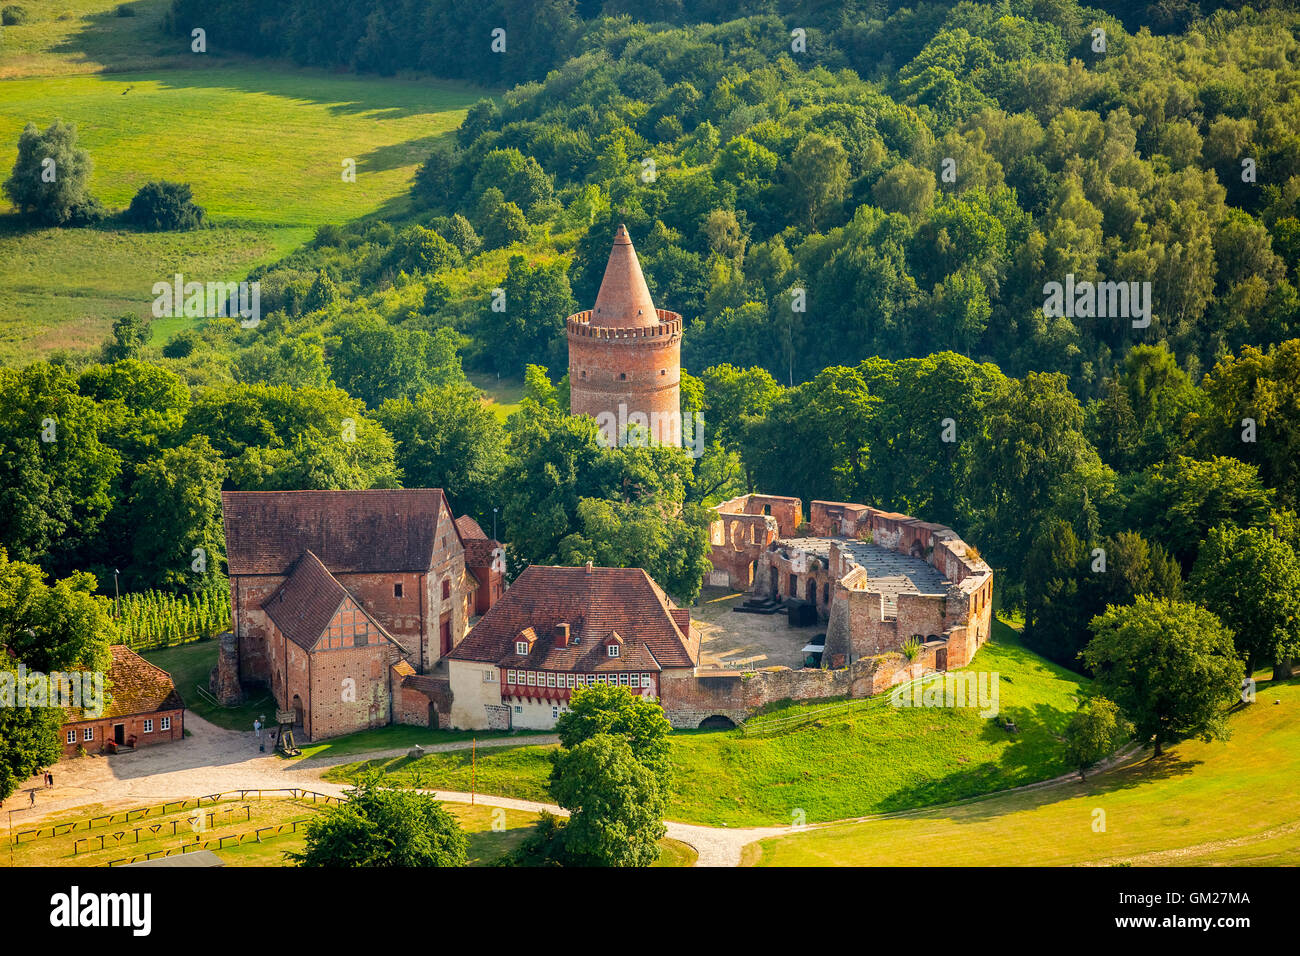 Aerial view, Burg Stargard northernmost castle Germany, dungeon, castle tower, ruins crooked house, Burg Stargard, Mecklenburg Stock Photo